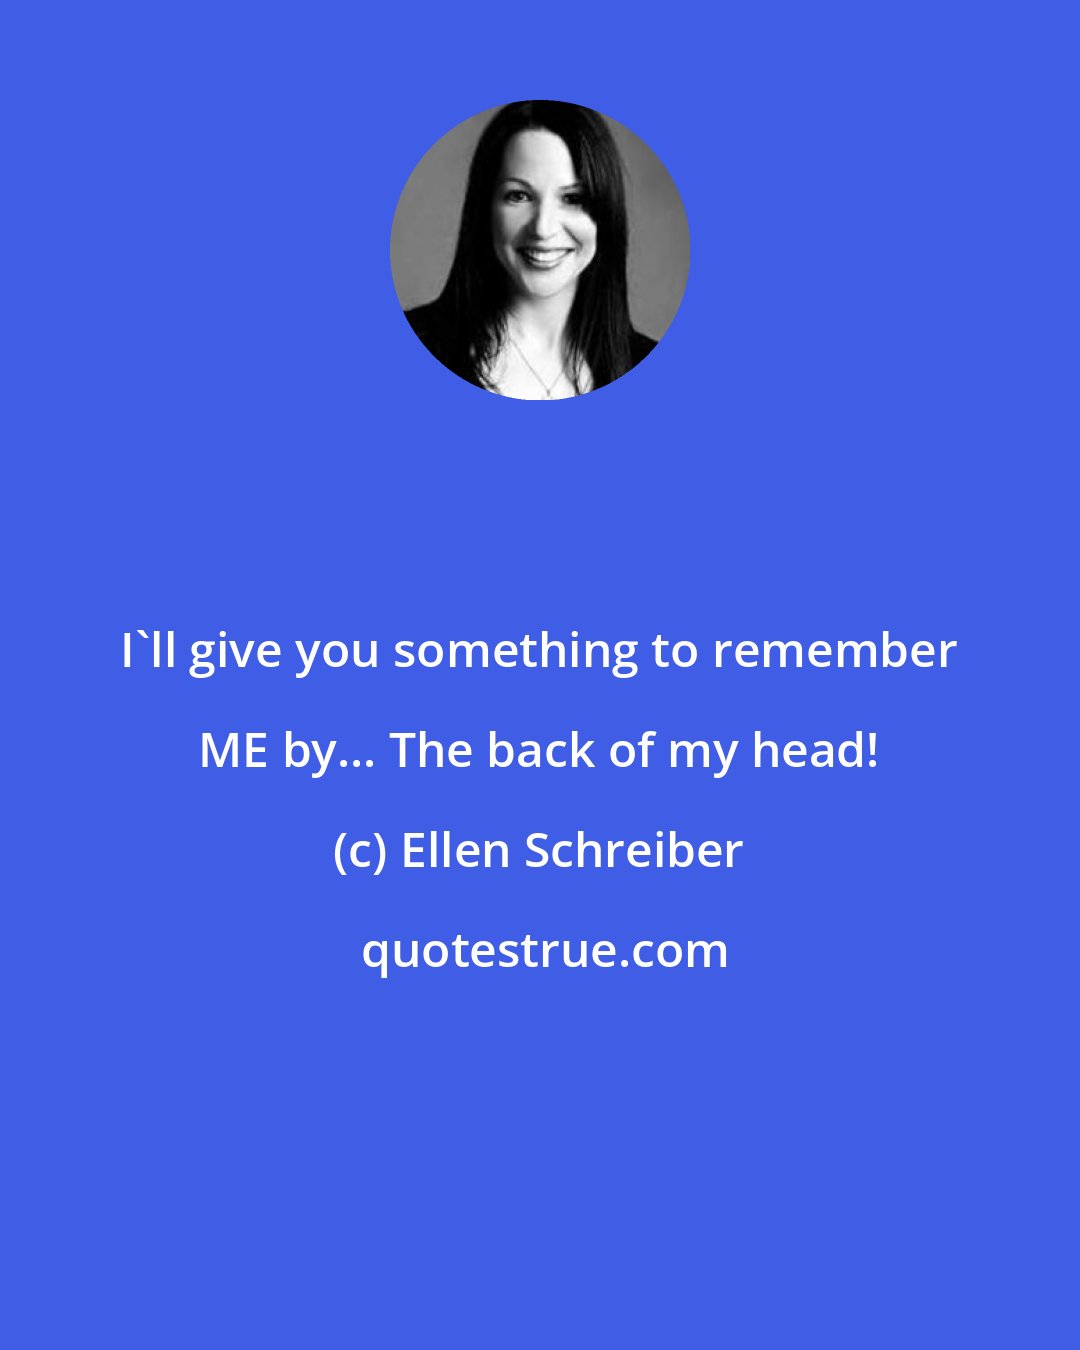 Ellen Schreiber: I'll give you something to remember ME by... The back of my head!